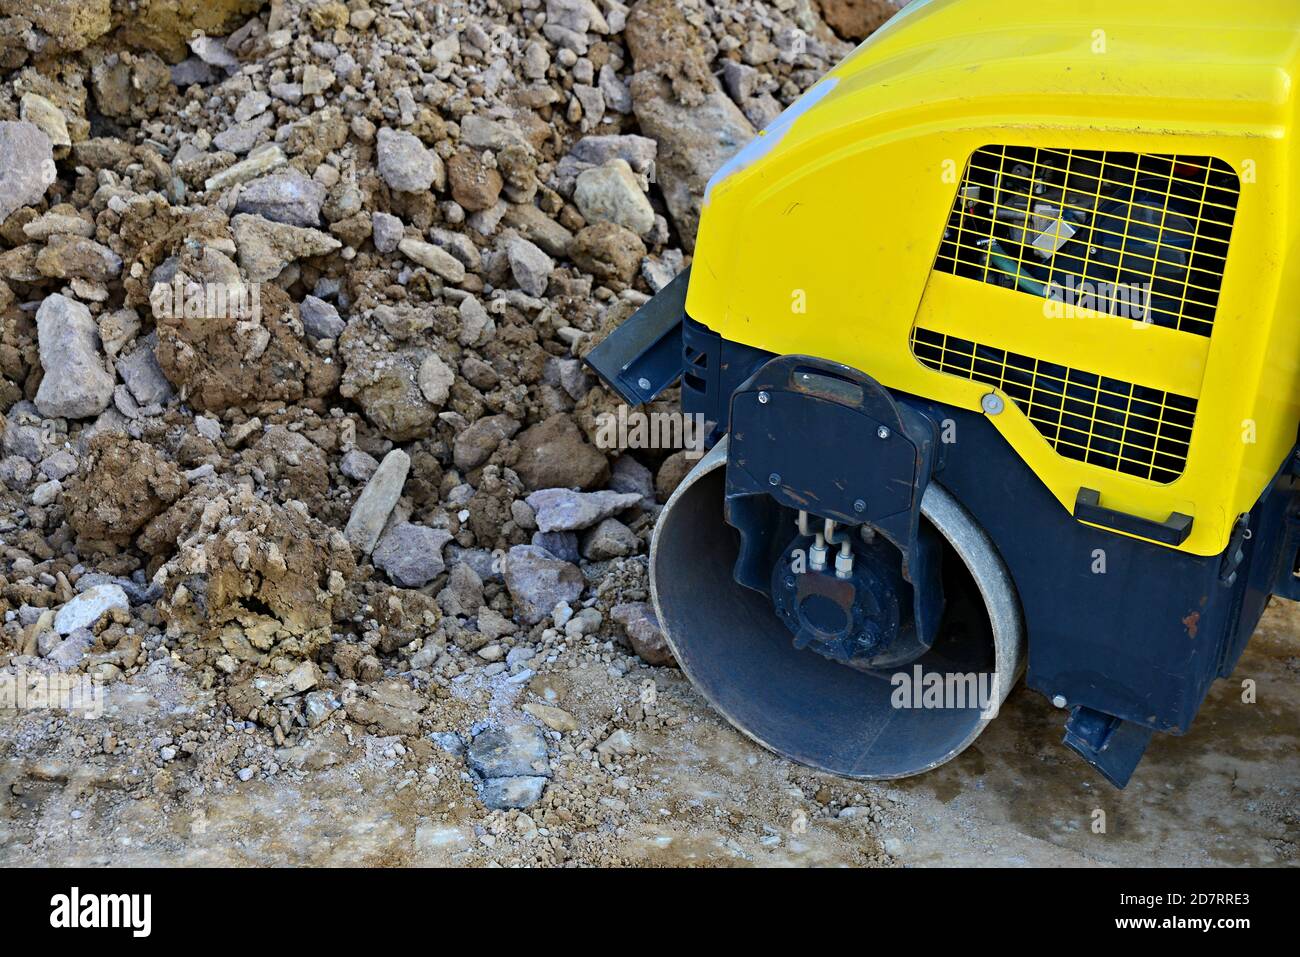 Background detail of a yellow road roller during stone paving. Rolled soil and stones. Substrate preparation for a new road. Steel industrial roller f Stock Photo